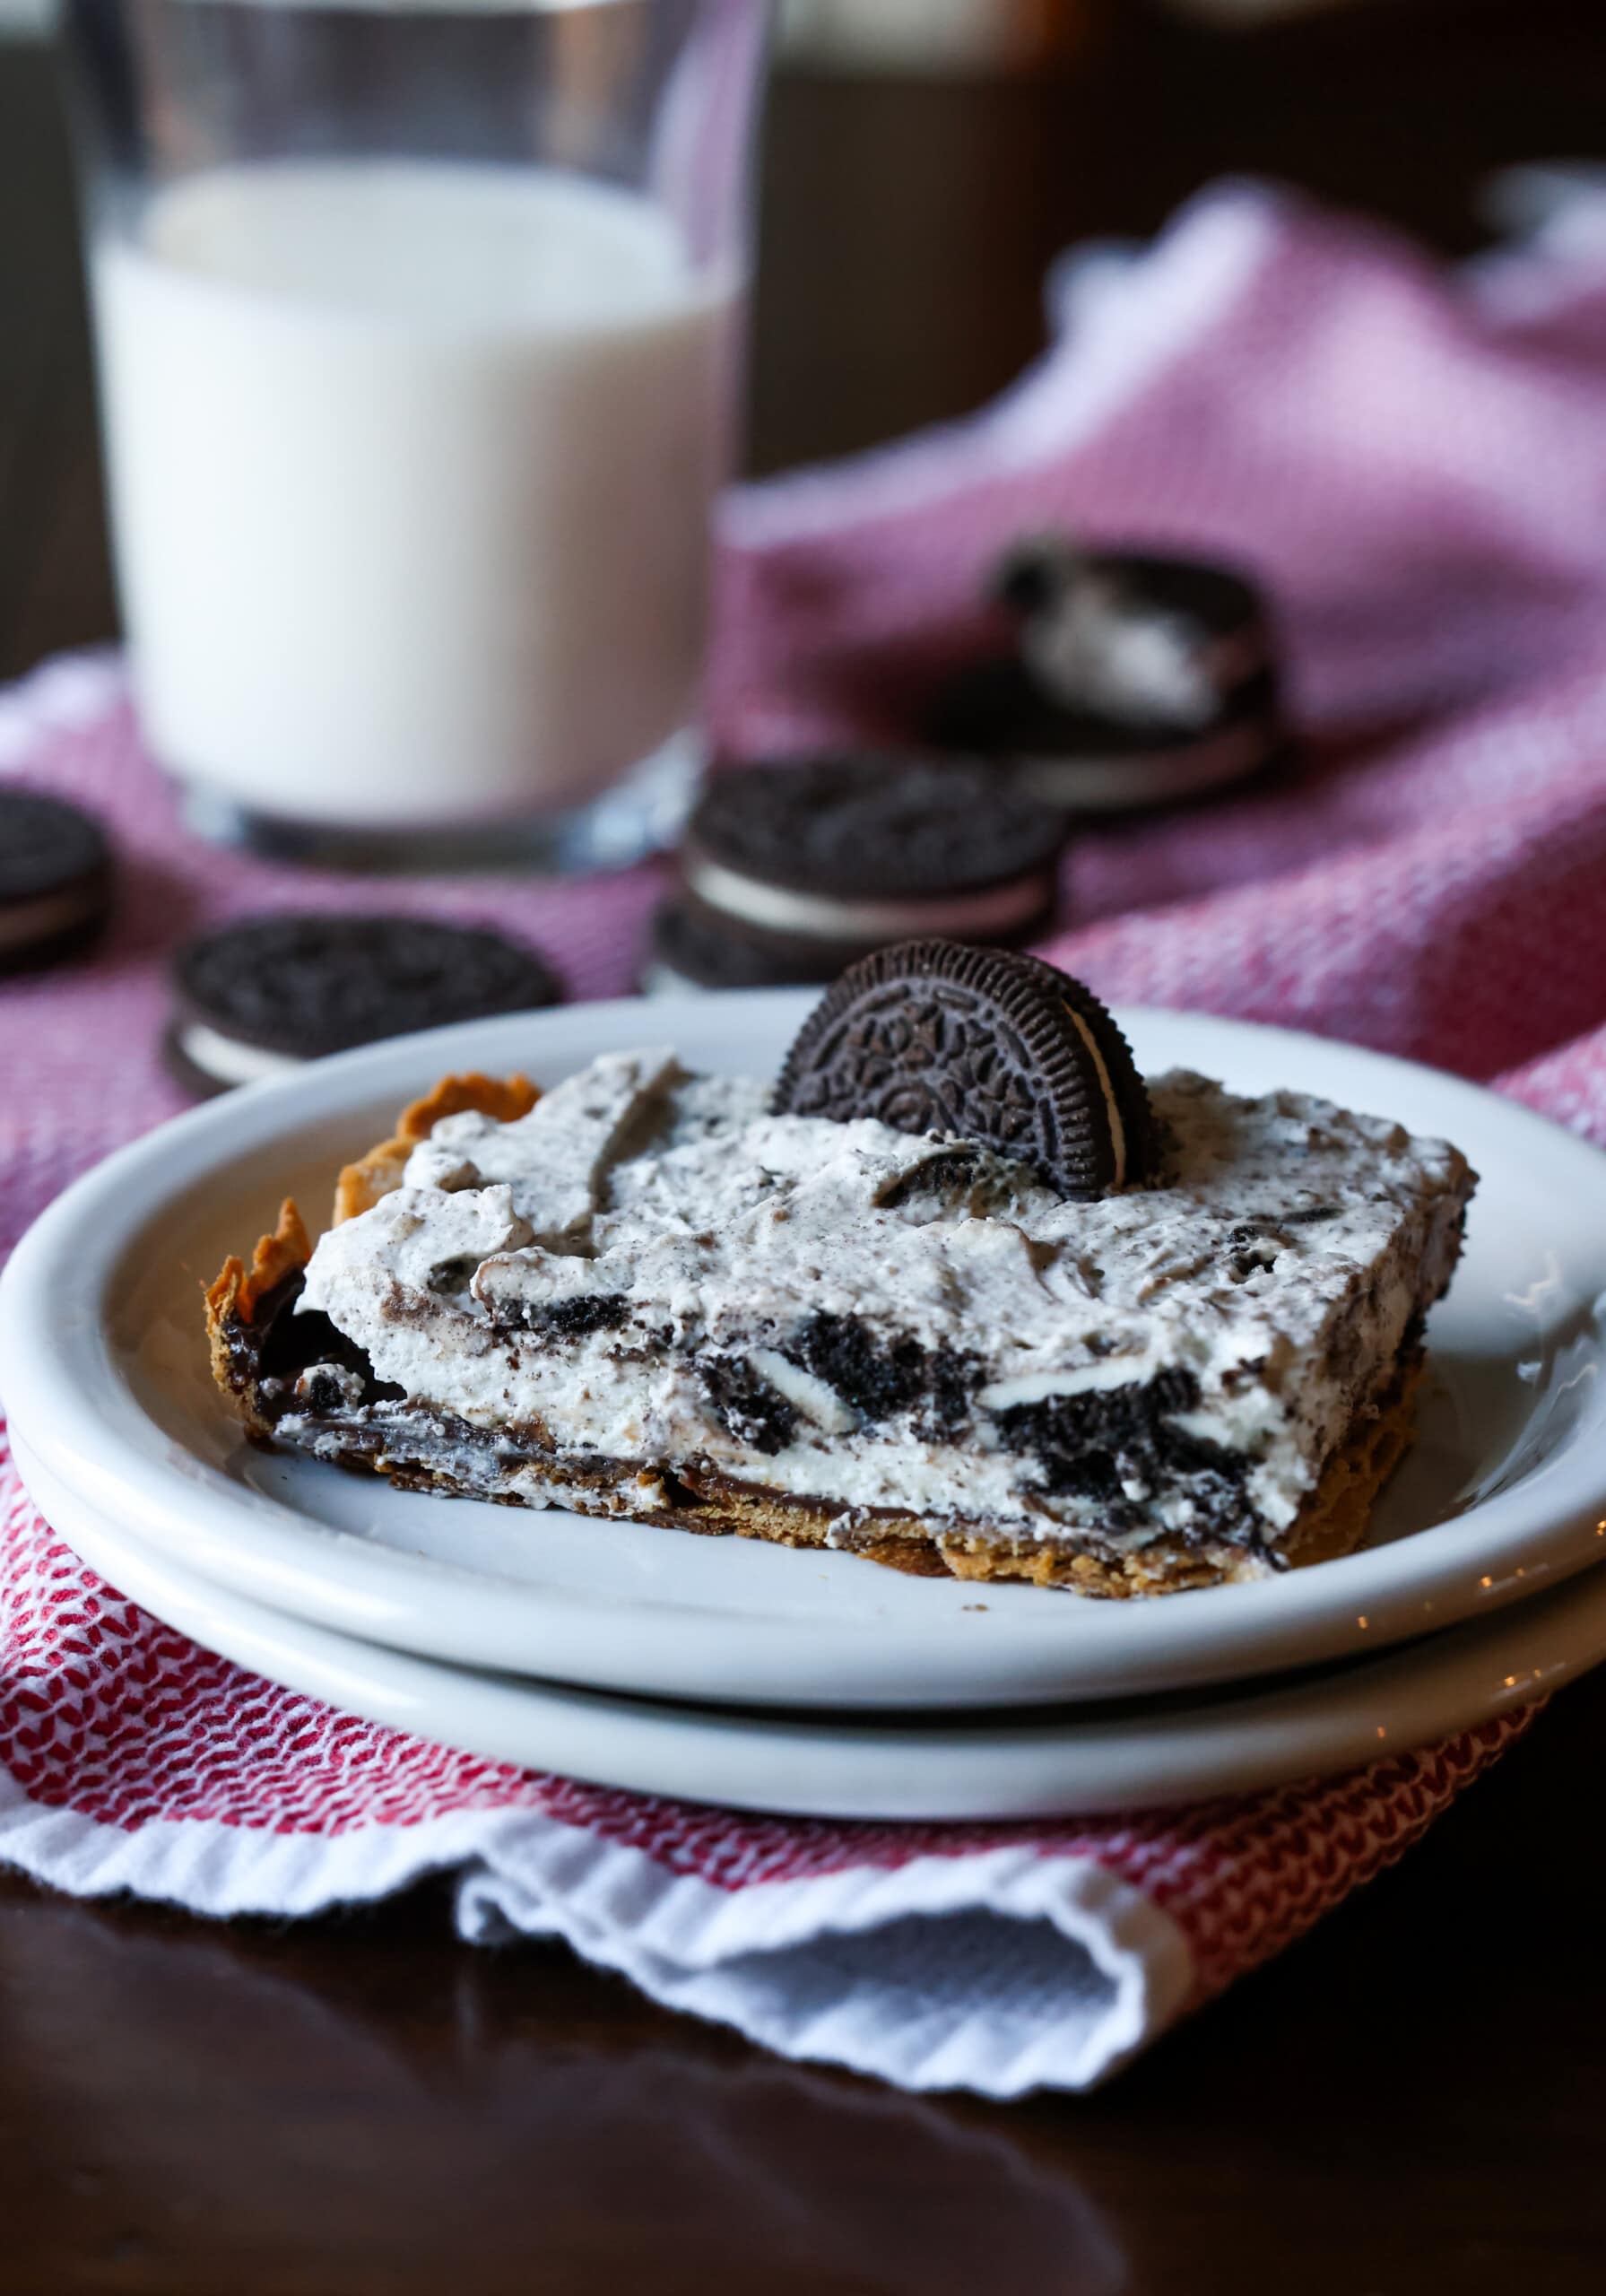 Oreo cheesecake pie served on a plate